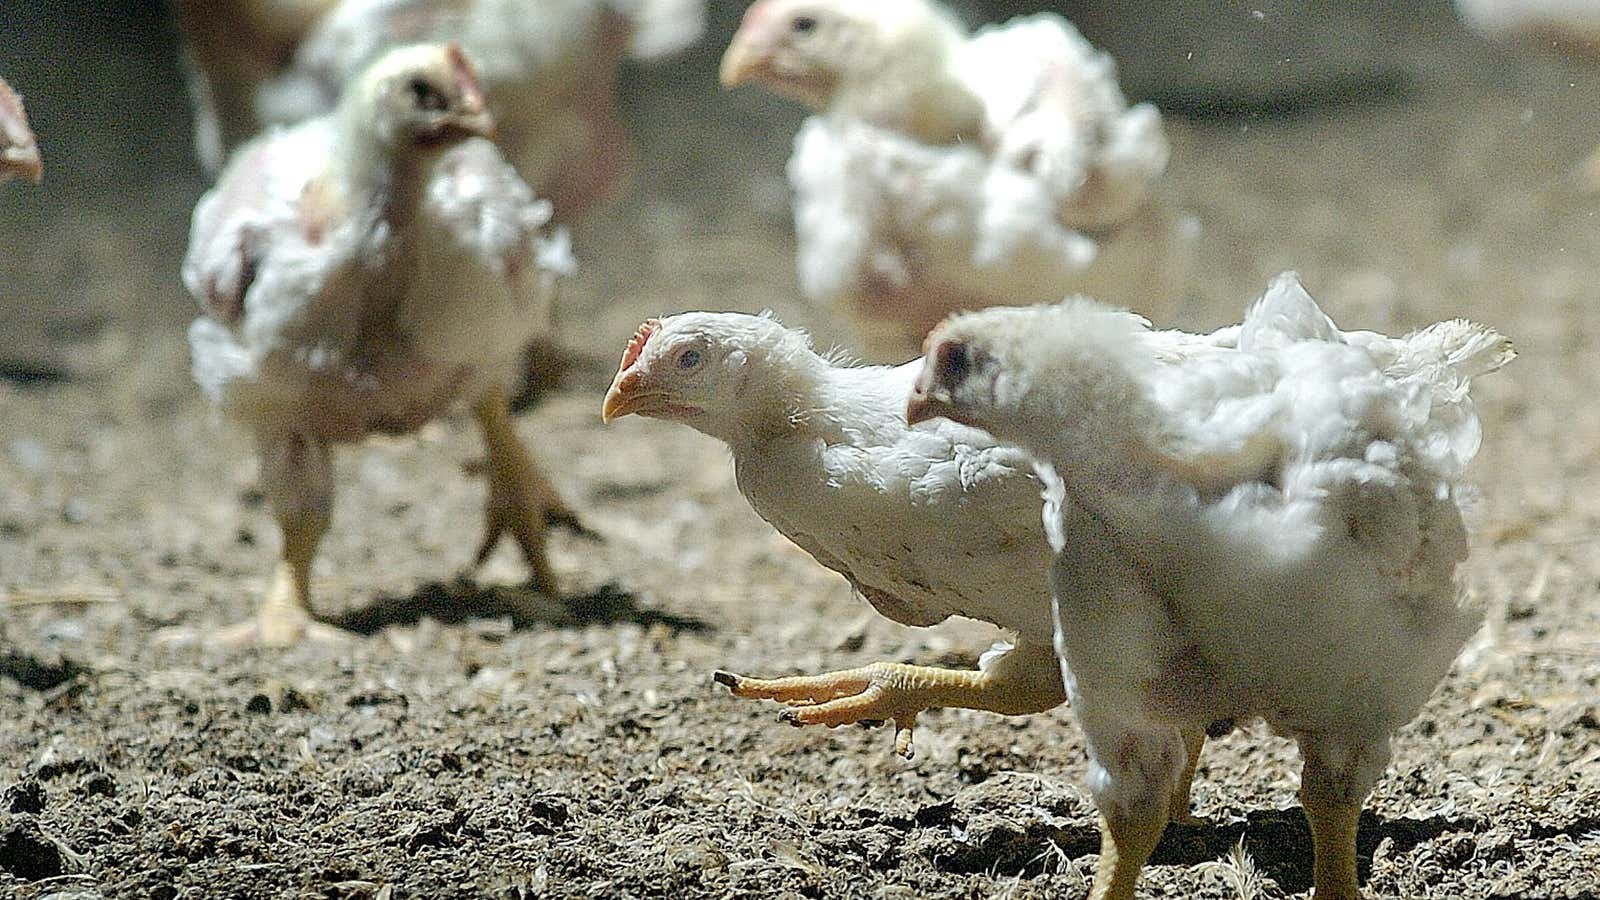 Delaware chickens wander in their chicken house on a farm in Sussex County, Delaware, February 8, 2004. A strain of the avian flu was discovered in a flock nearby in Harrington, Delaware, and the infected chickens were destroyed and surrounding chicken growers birds are undergoing testing to isolate a strain of the disease which is not thought to be harmful to humans. REUTERS/Tim Shaffer  TMS/GAC